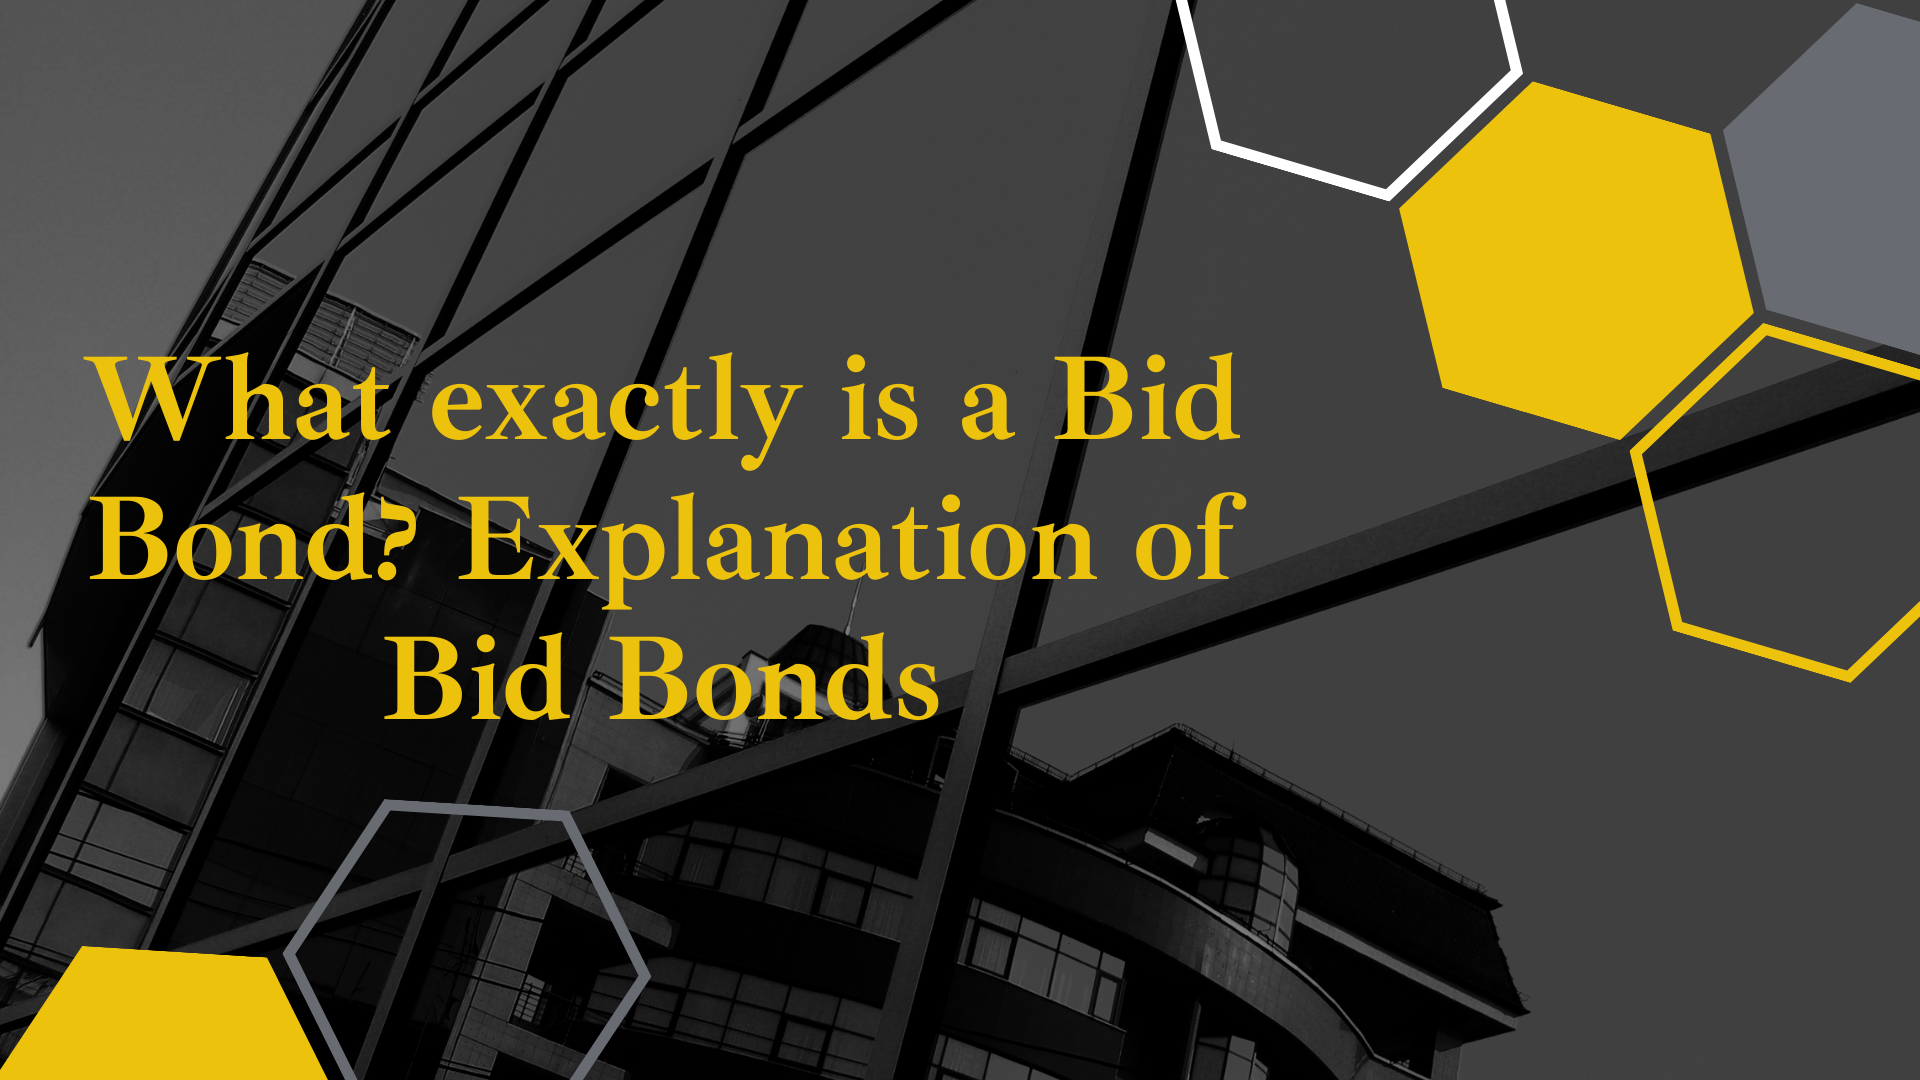 bid bond - What exactly is a bid bond, and how does it function - buildings